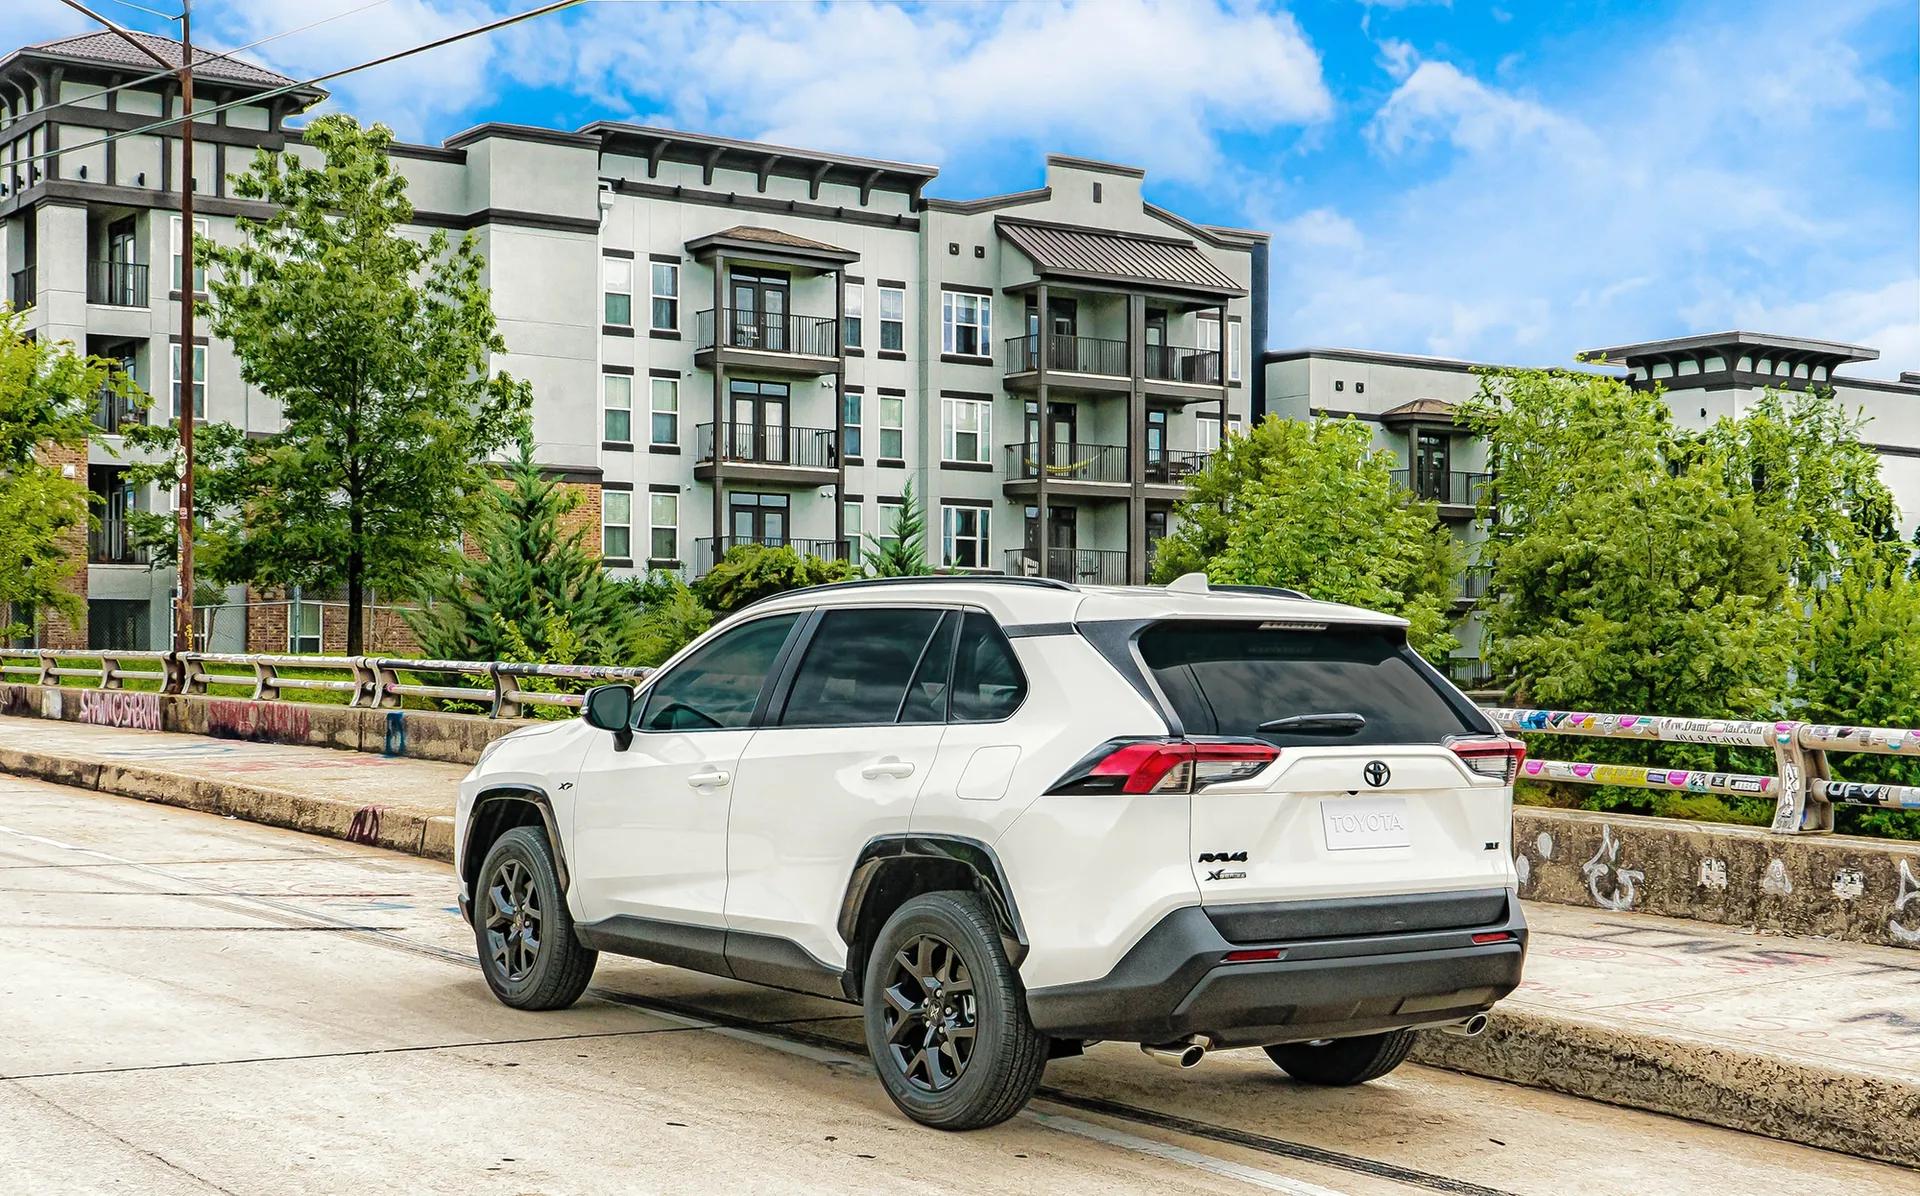 RAV4 Xseries parked on bridge in front of apartment building